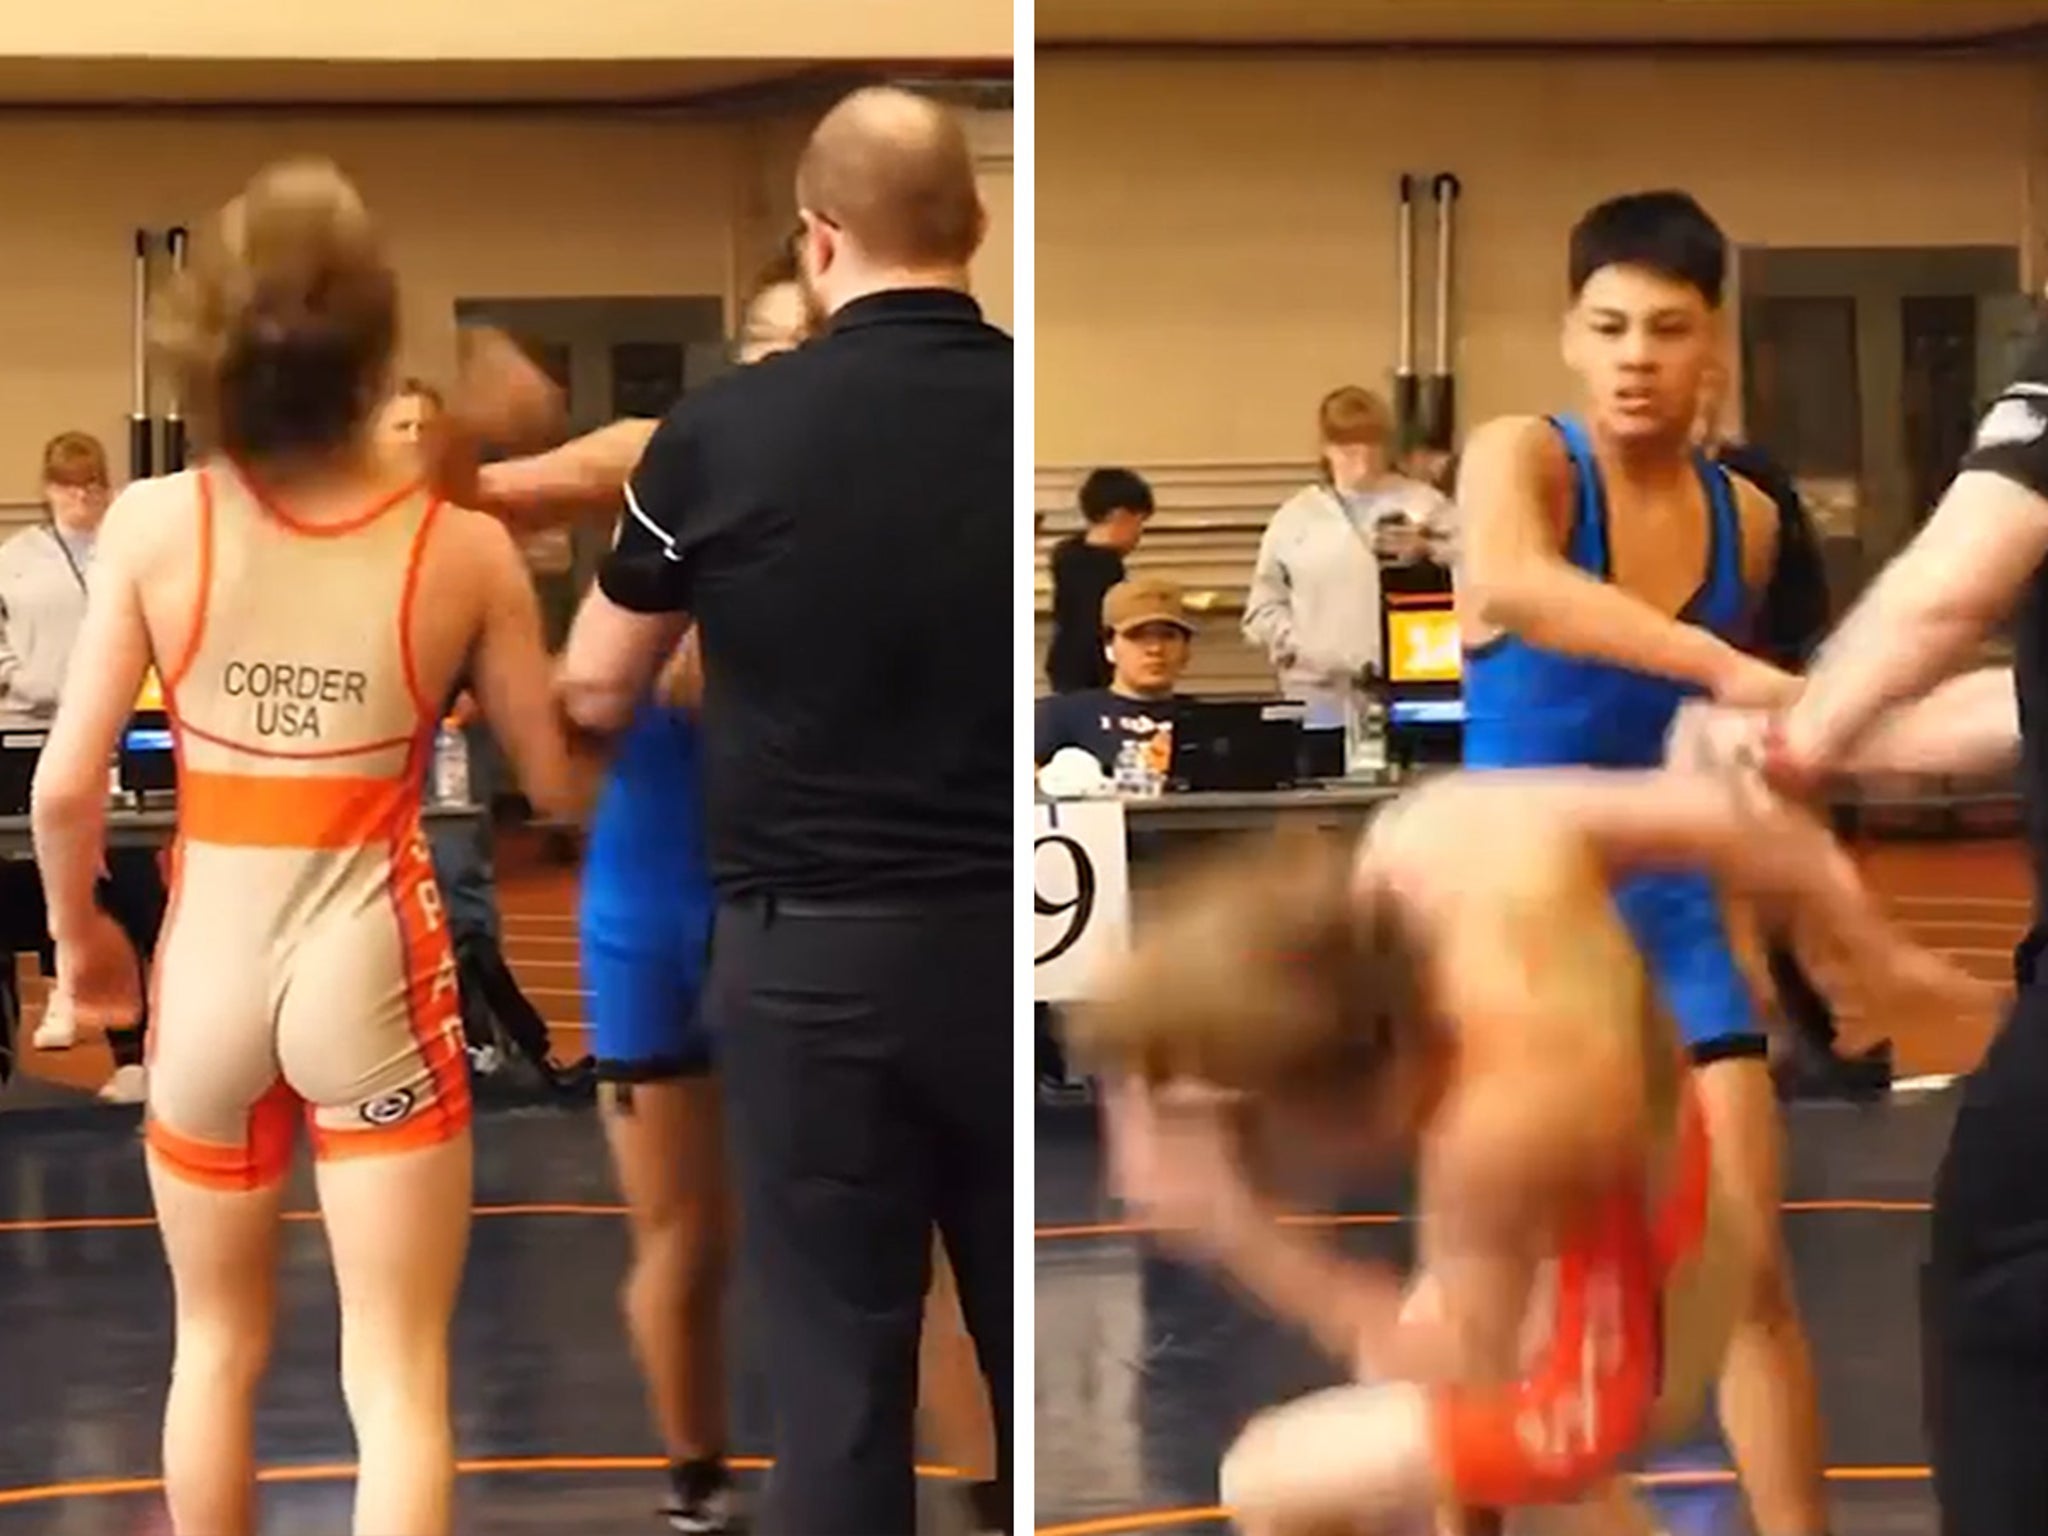 Youth Wrestler Sucker Punched After Winning Match, Police Investigating image